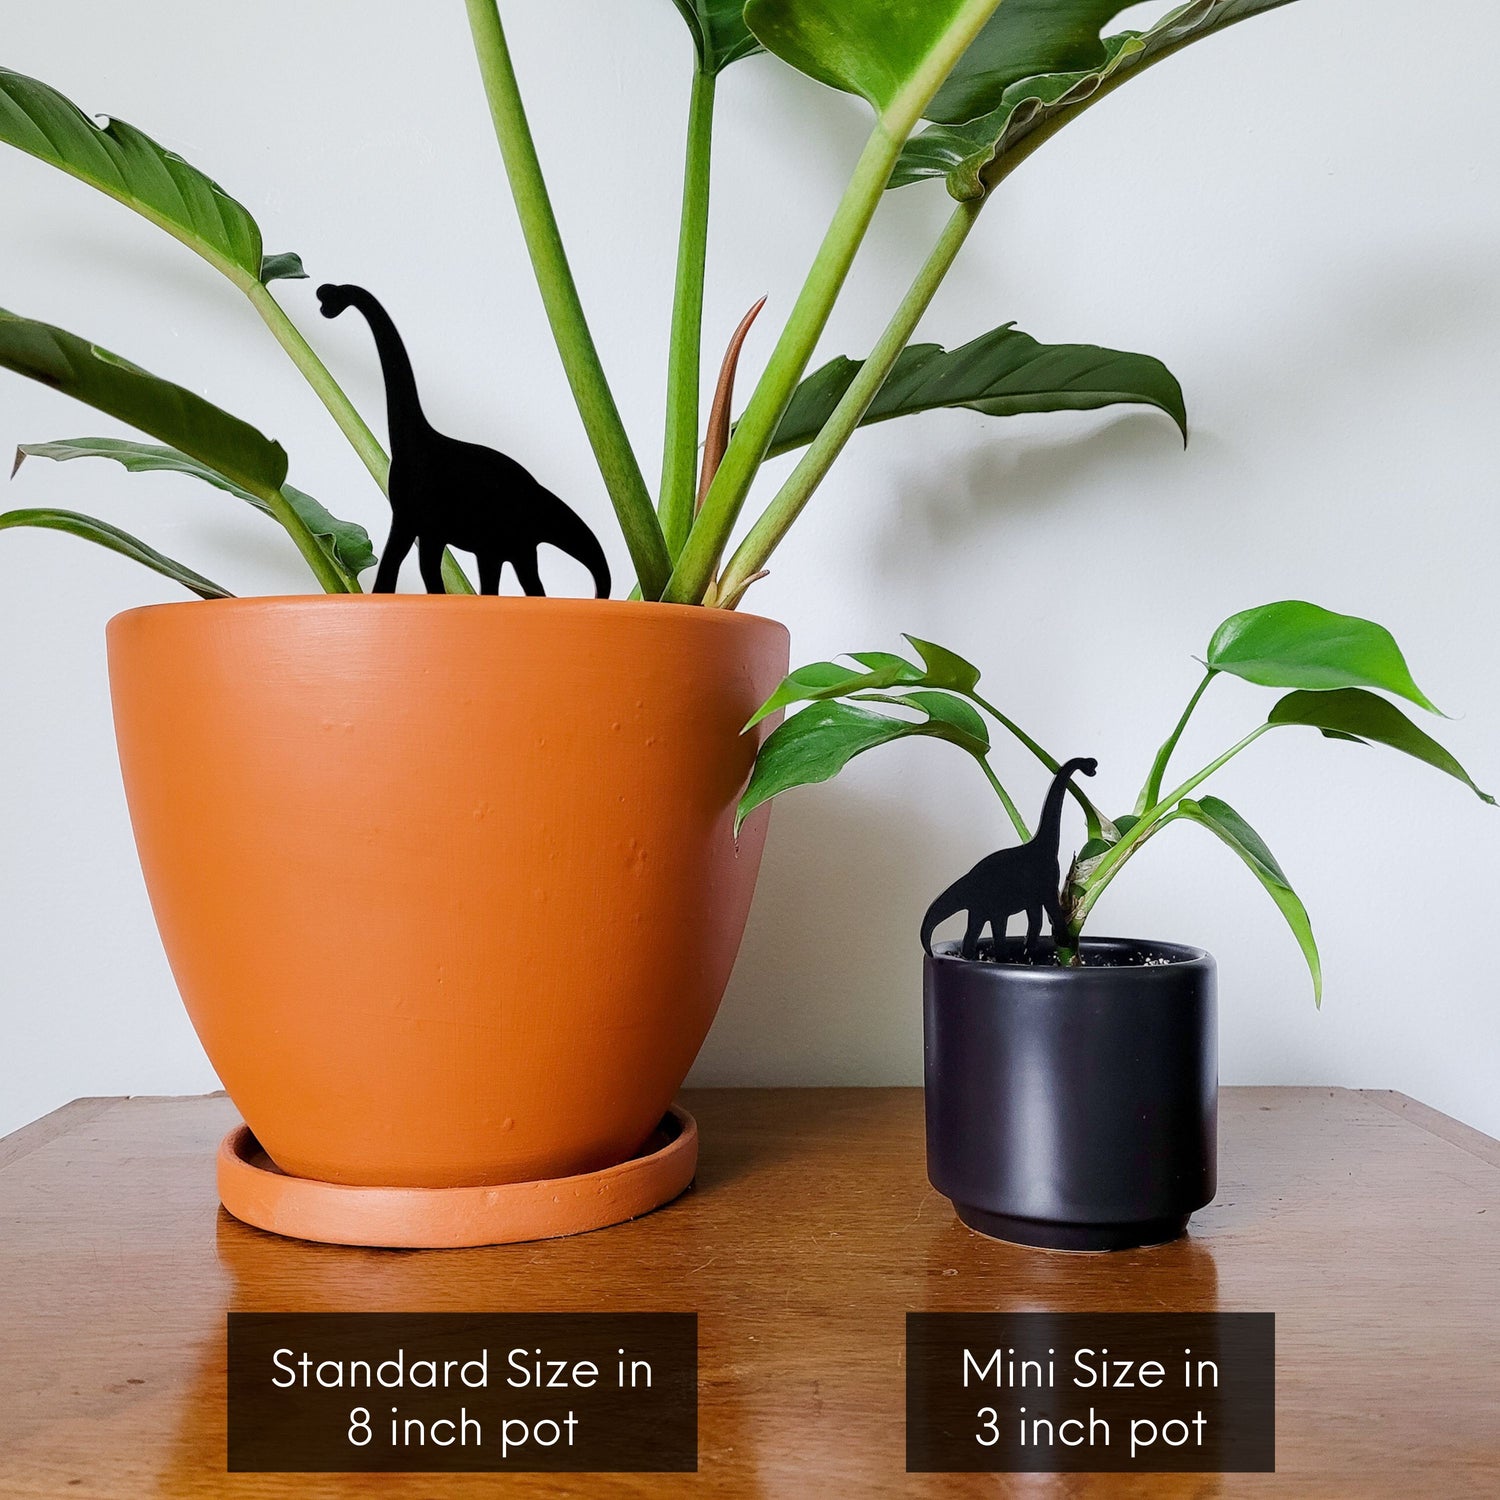 Standard and Mini plant stakes displayed in two pots of houseplants.